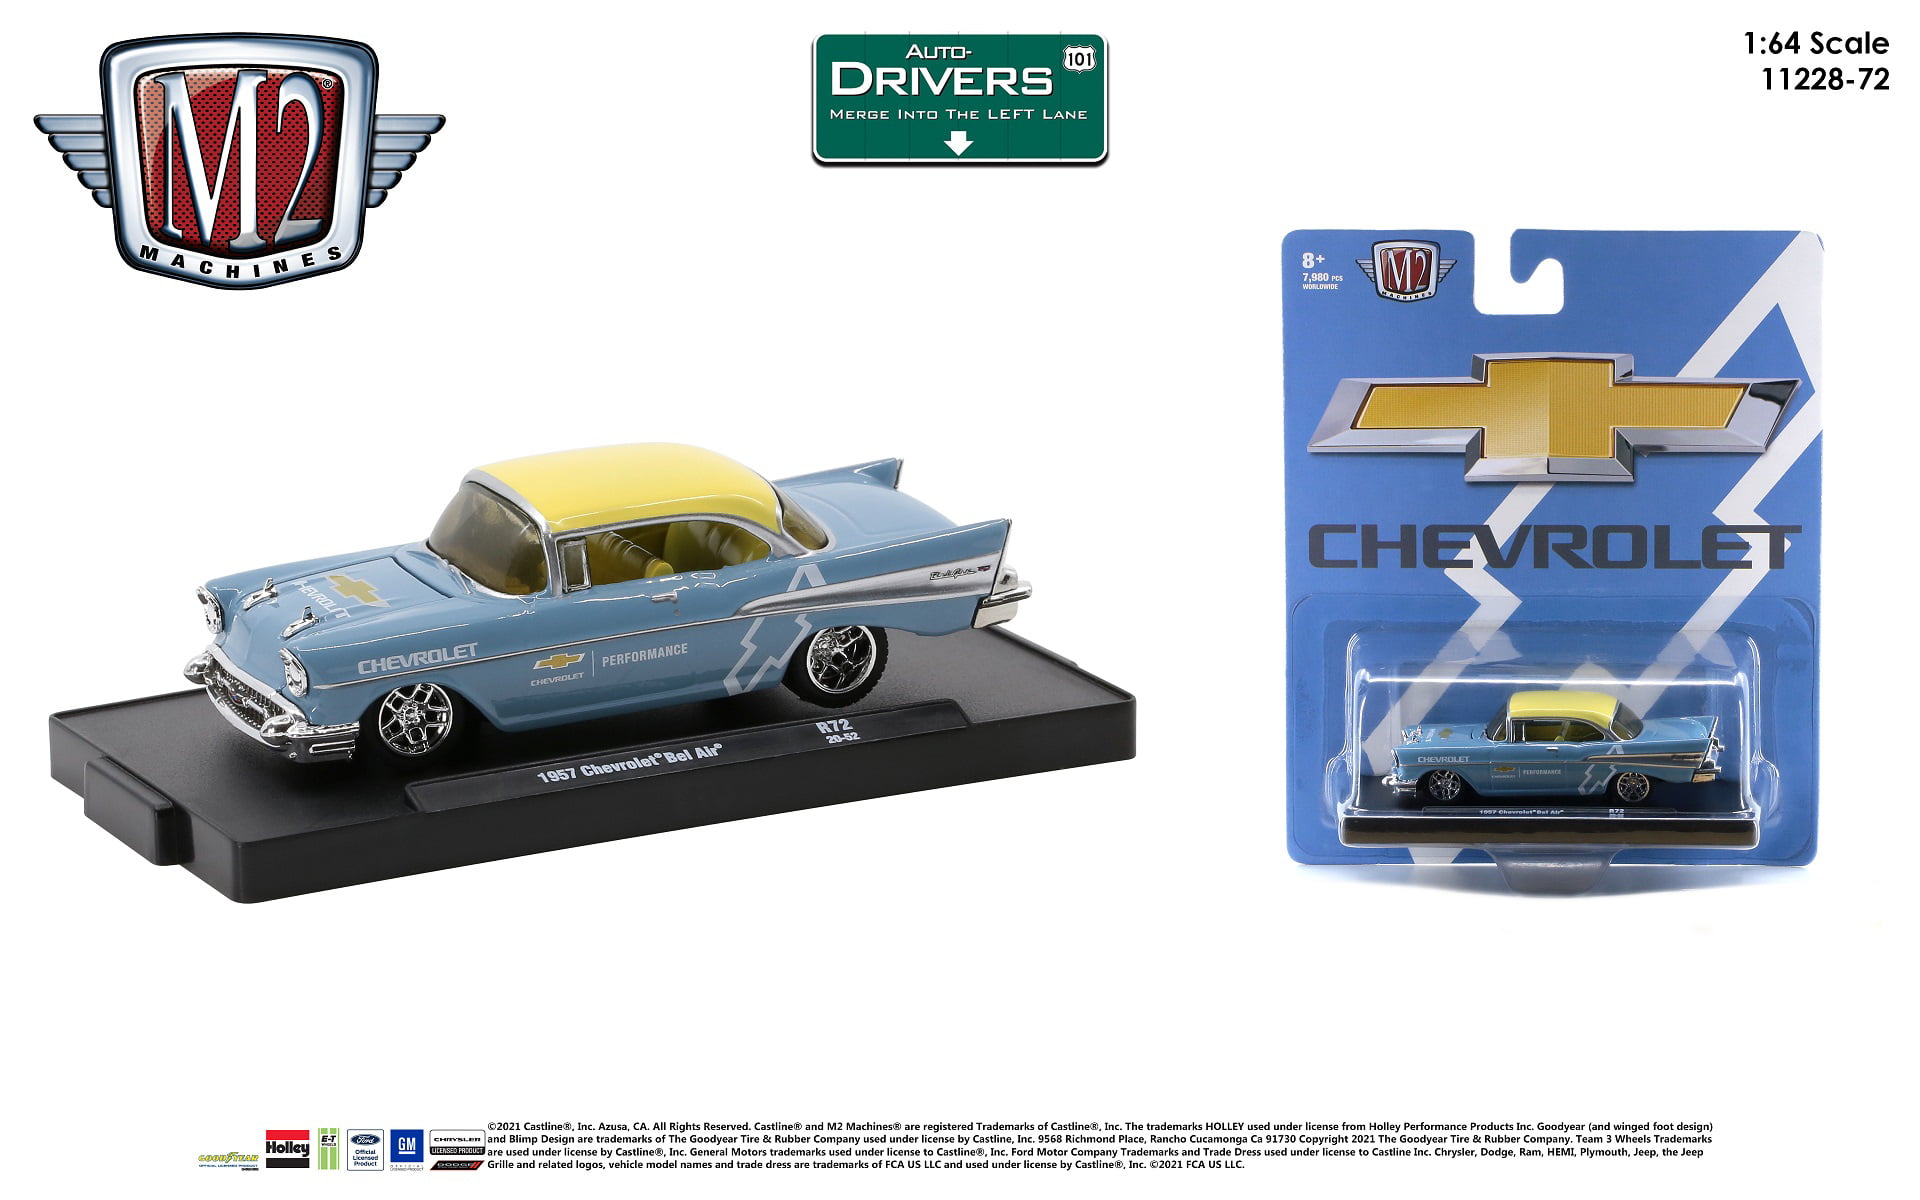 "DRIVERS" RELEASE 72 6 PC SET 1/64 DIECAST MODEL CARS BY M2 MACHINES 11228-72